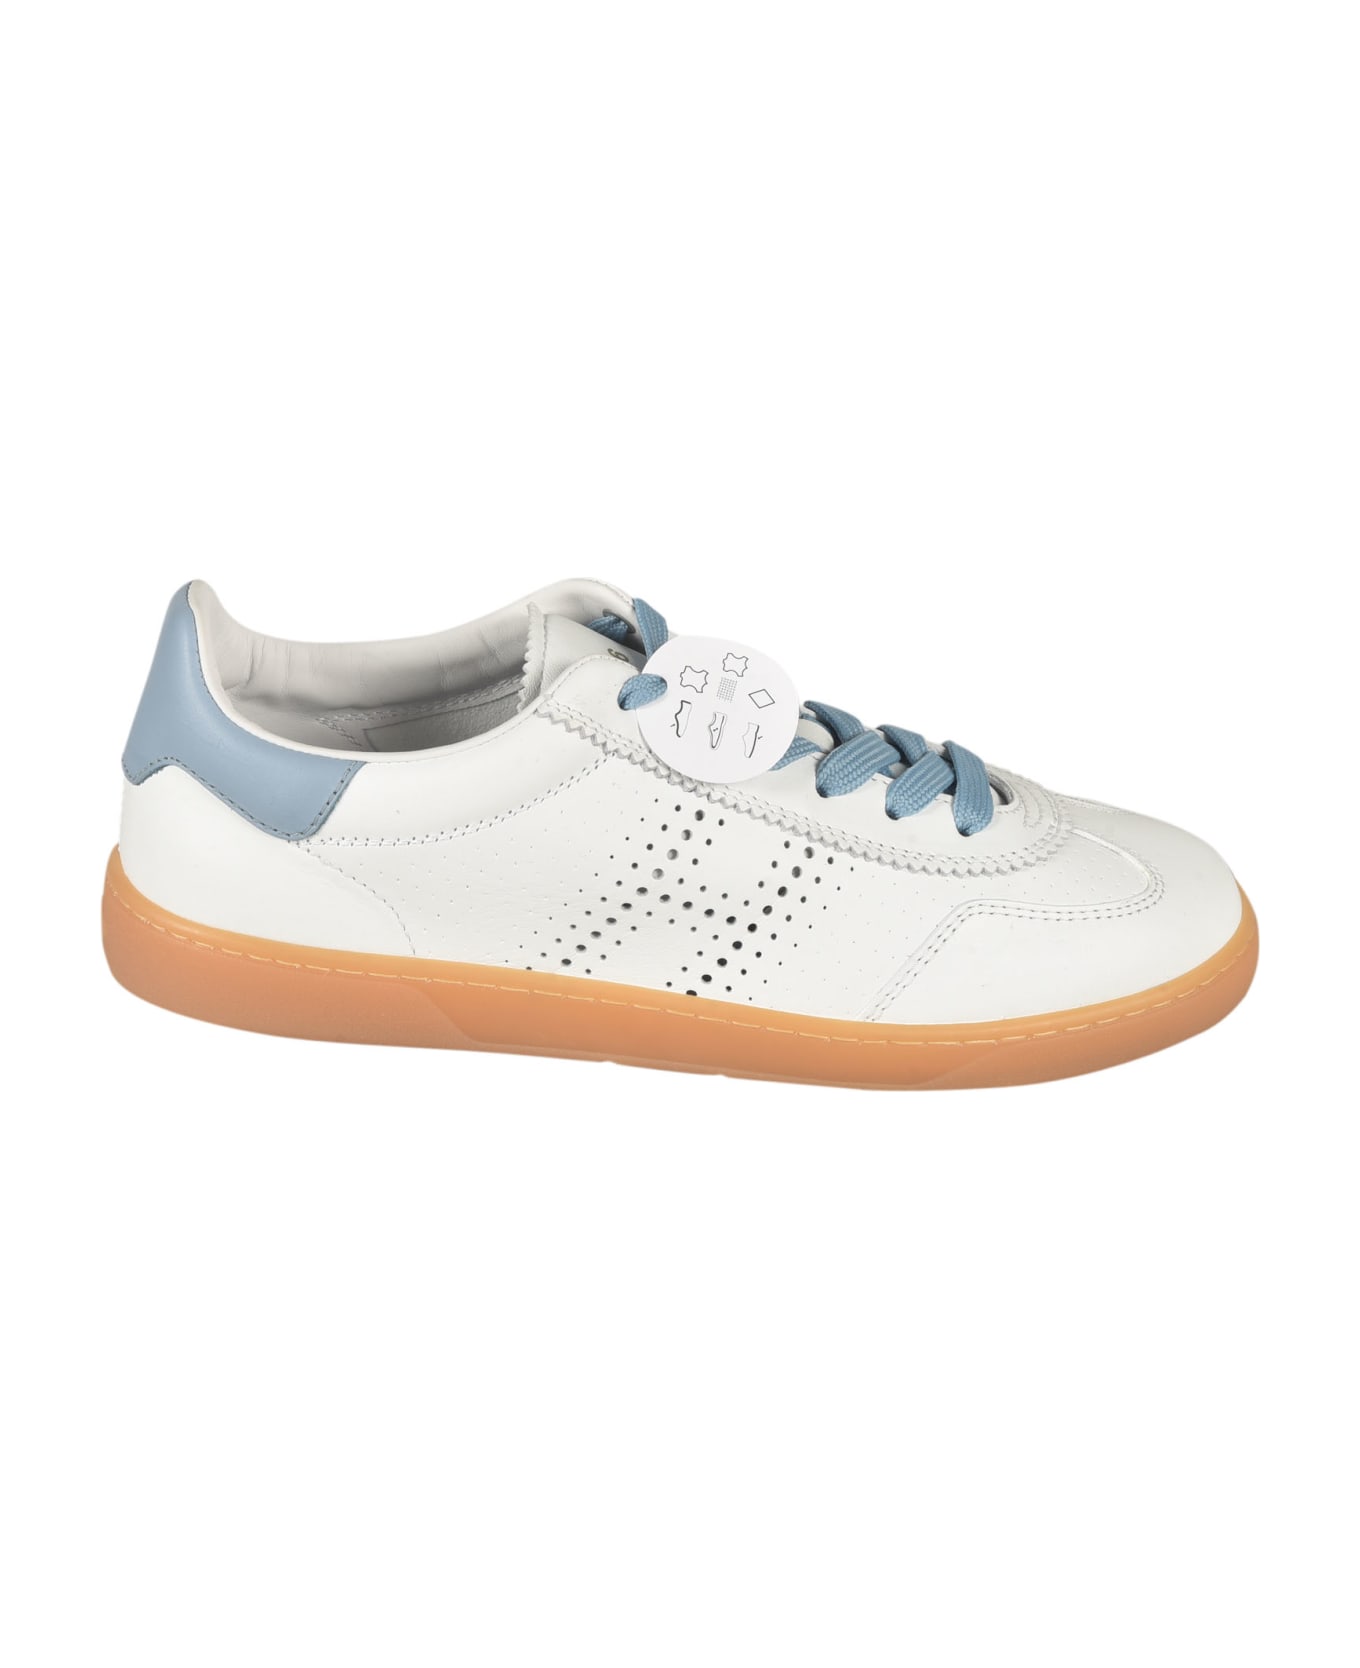 Hogan Perforated Low Sneakers - White